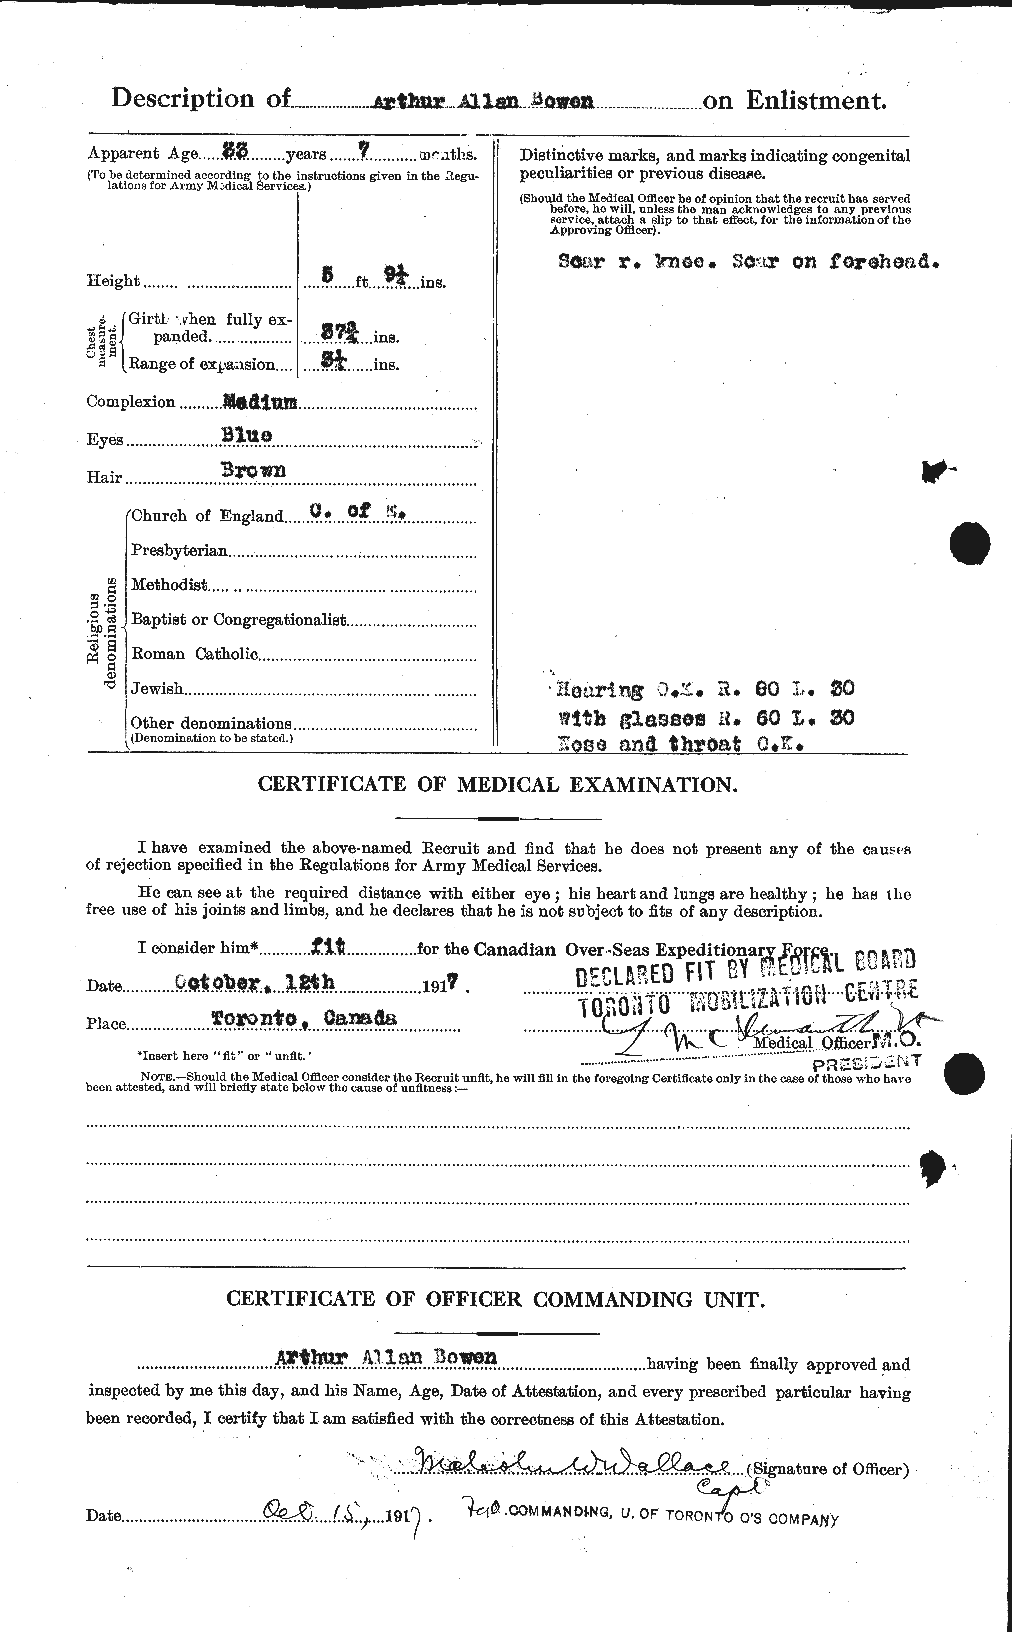 Personnel Records of the First World War - CEF 255355b